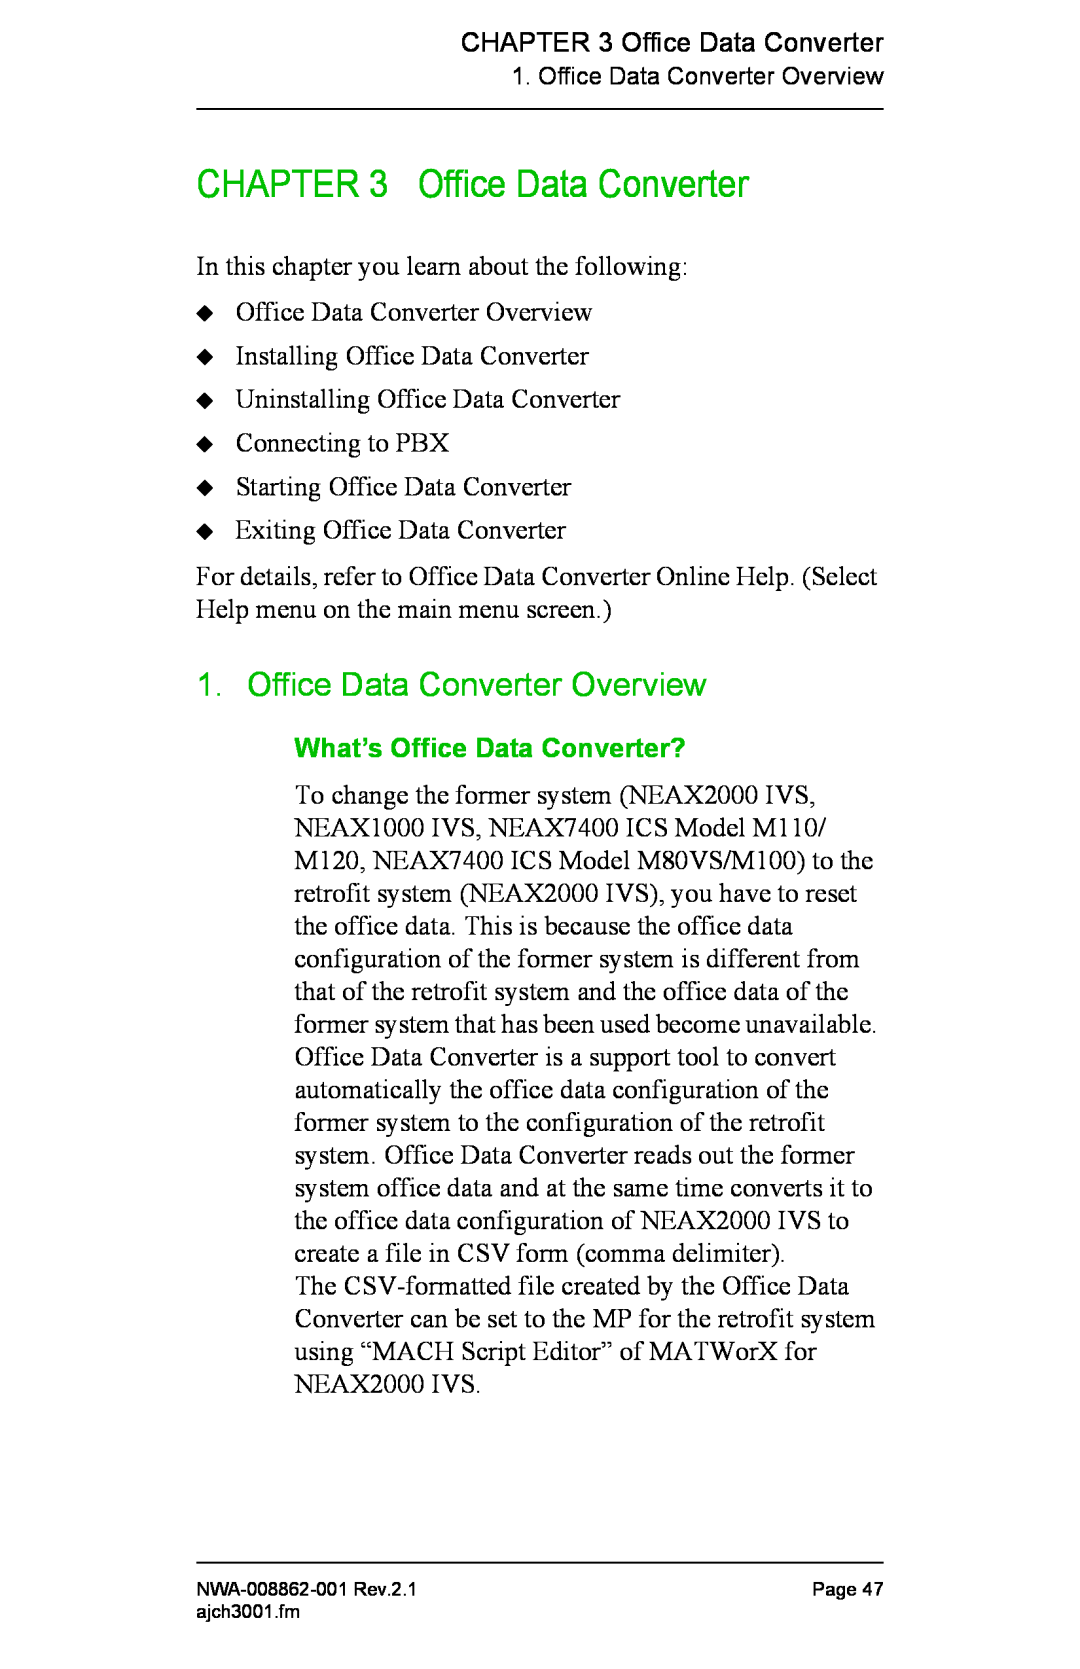 NEC NWA-008862-001 manual Office Data Converter Overview, What’s Office Data Converter? 